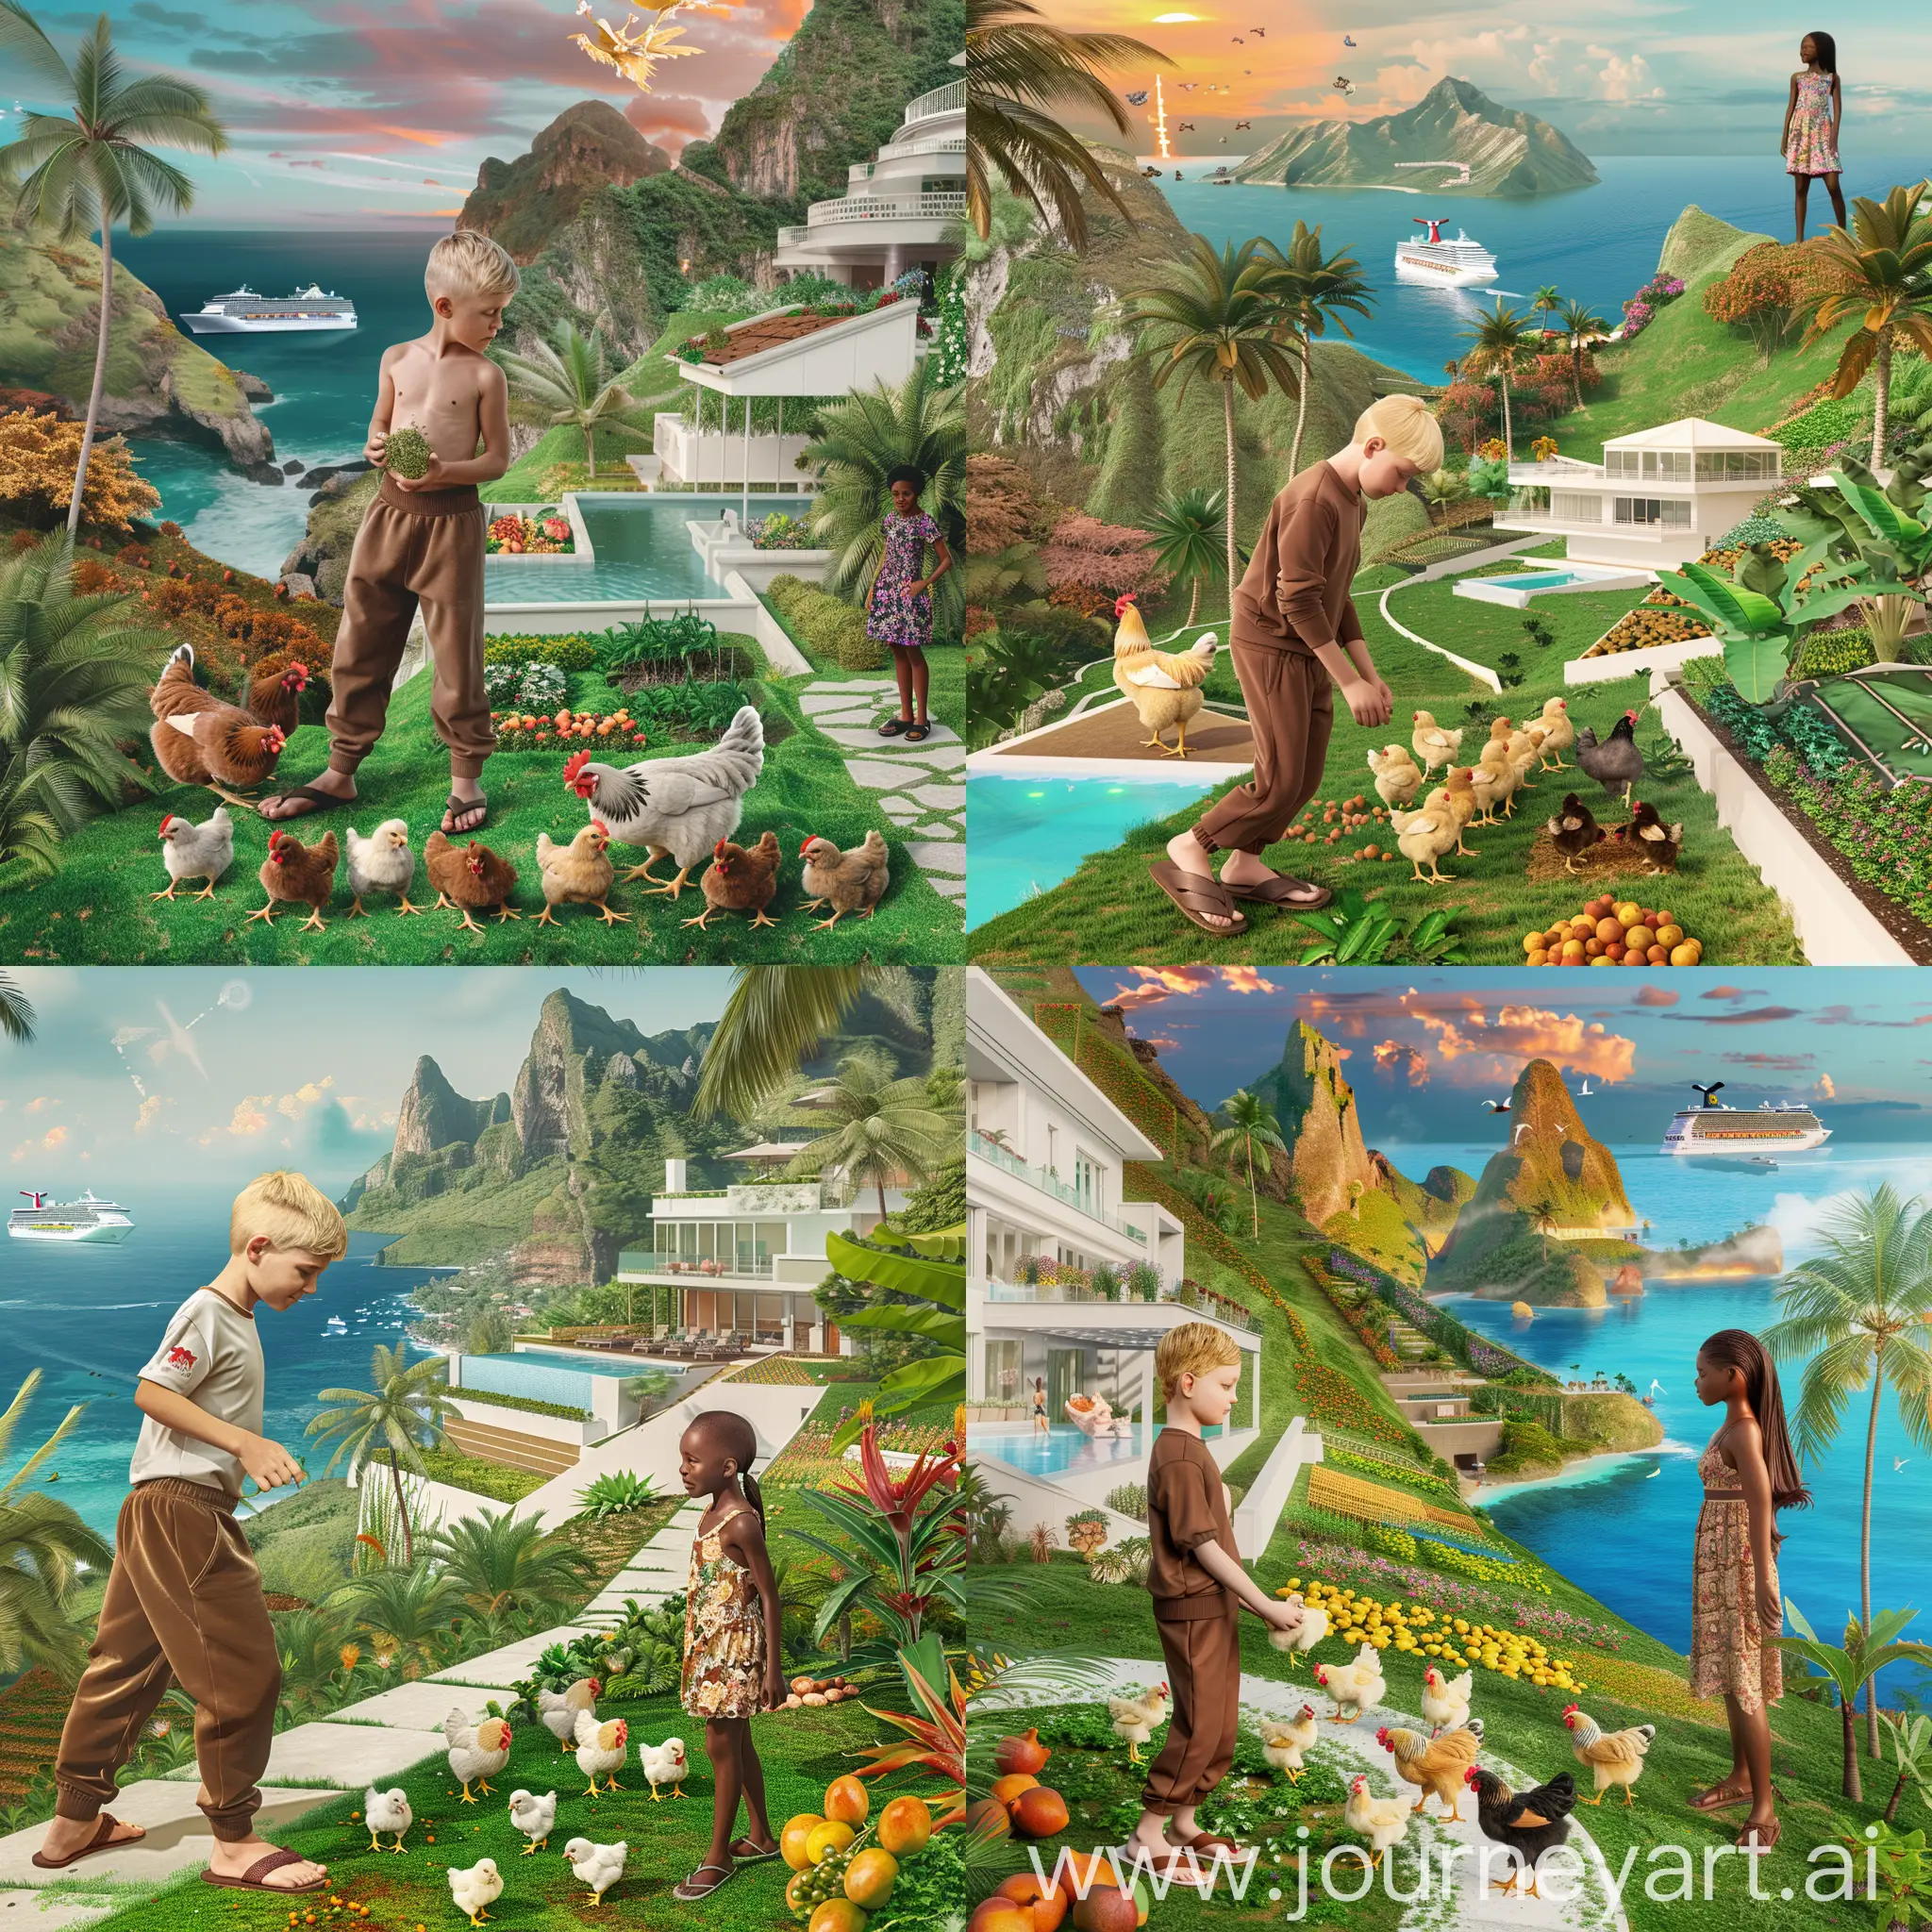 "RealisticV6 model  photo of a tall, blonde-haired and blue-eyed white boy in brown sweatpants and flip flops feeding six grown chickens and fifteen baby chicks on vibrant green grass. A lush fruit and vegetable garden brims with fresh produce in the backyard of an elegant, modern white house featuring an infinity edge pool. The house is flanked by a walkway lined with palm trees that lead to a distance where six towering mountains bloom with colorful flowers, freshly grown crops, coconut trees, mango trees, and grassy terrains. The background showcases a stunning holographic sunset reflecting off the ocean's surface where a cruise ship sails past tiny islands.  High up on one of these mountains stands a beautiful short teenage black girl who is slim thick. Her long hair is tied in a ponytail as she wears an elegantly fitted floral dress that compliments her figure. She stands next to her own beautiful modern house complete with pool, car garage, balcony and outdoor kitchen located on the mountain slope.  The black girl stands at the top of the hill overlooking the scene below - watching intently as the boy feeds his chickens - her gaze filled with admiration as she takes in this serene moment amidst the breezy afternoon air."